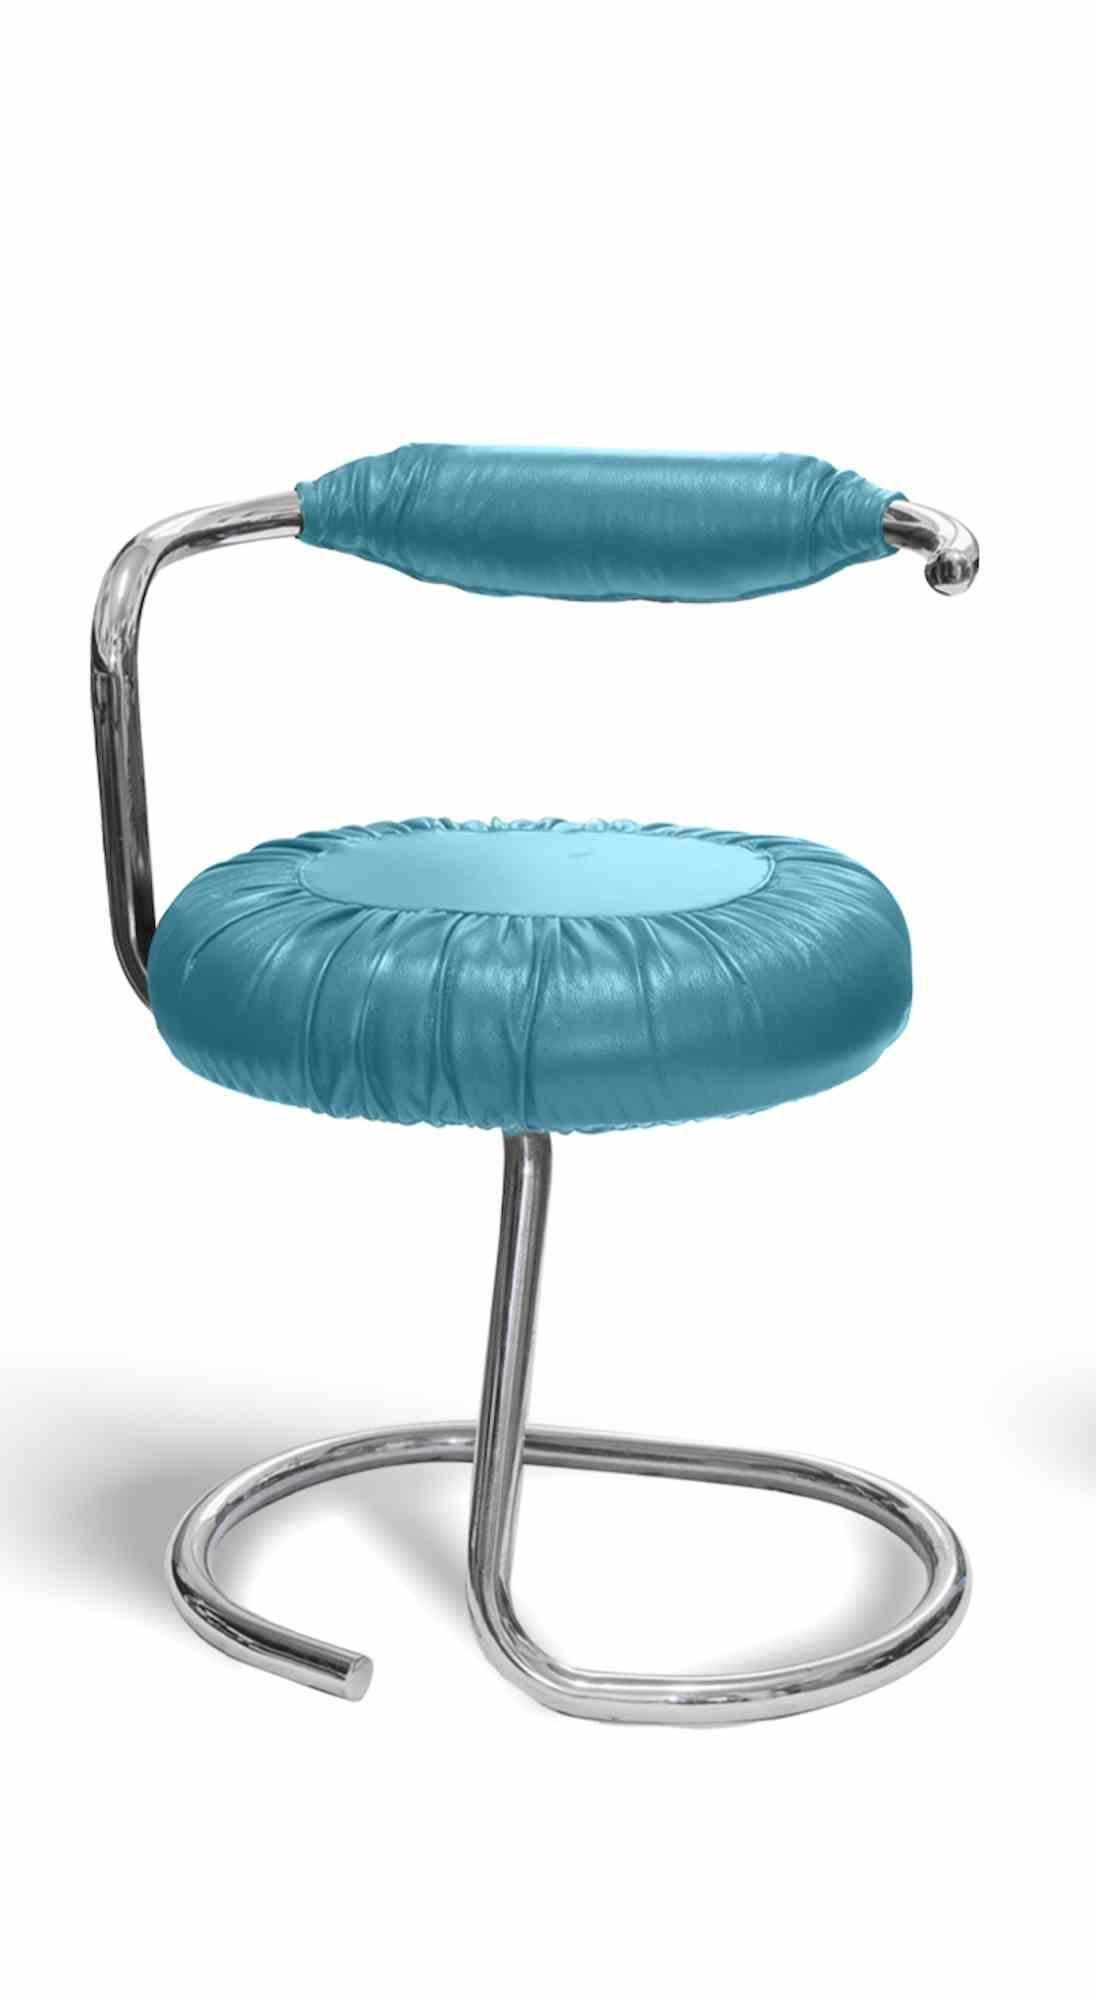 Italian Set of 8 Light Blue Cobra Chairs by Giotto Stoppino, Italy, 1970s For Sale